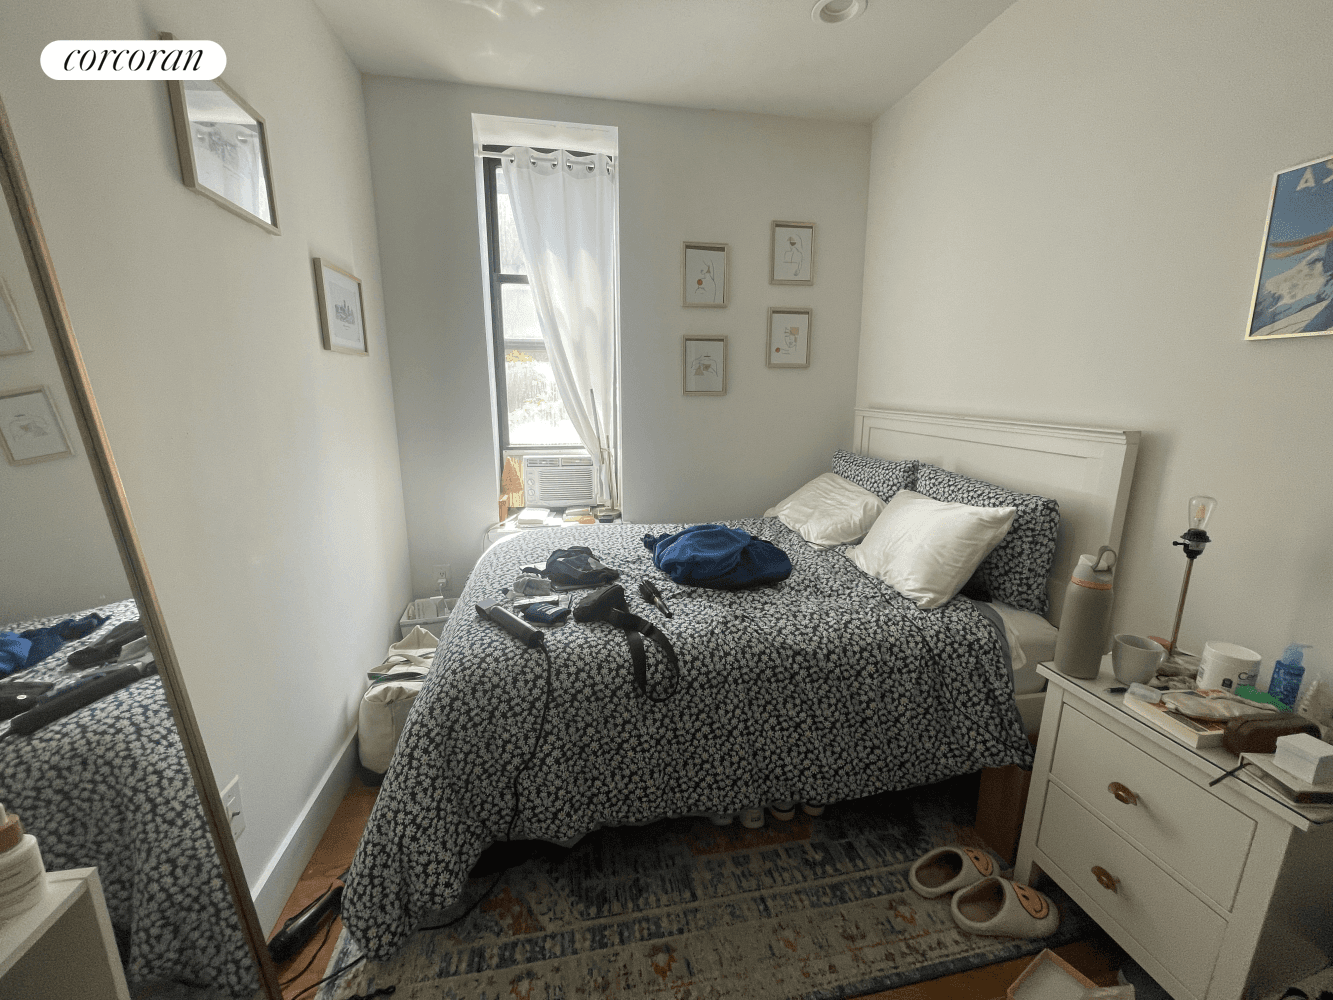 AVAILABLE JUNE 1. This gorgeous, totally renovated 2 bedroom is waiting for you in prime South Harlem, just a stone's throw away from beautiful Morningside Park !